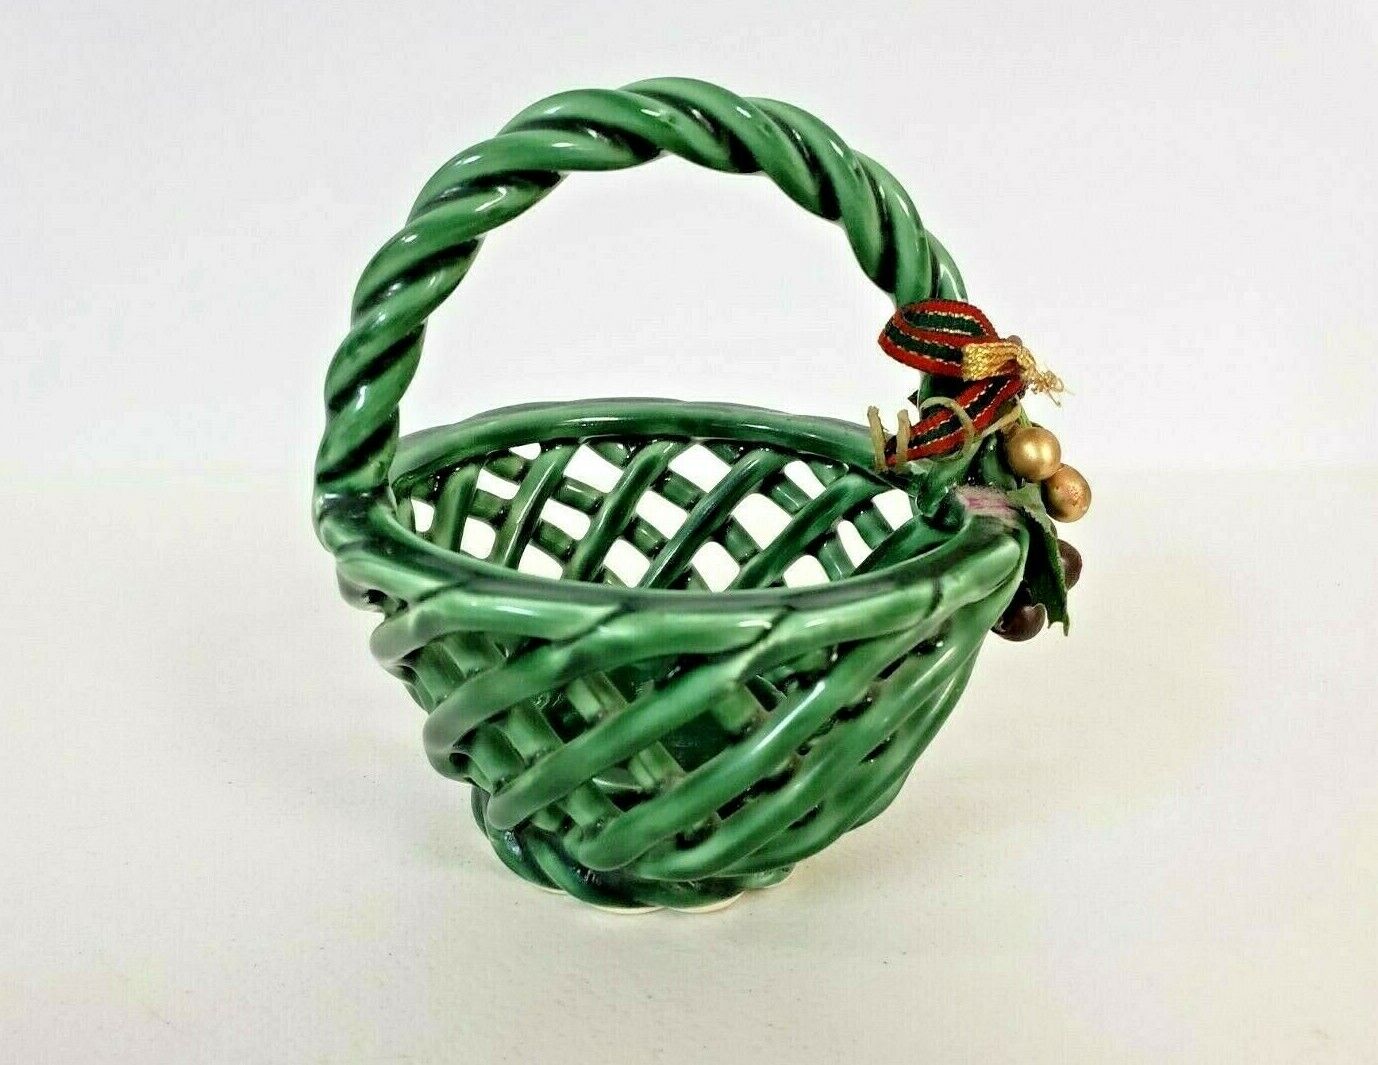 Vintage Ceramic Green Woven Basket with Handle Small 5.25in high decor